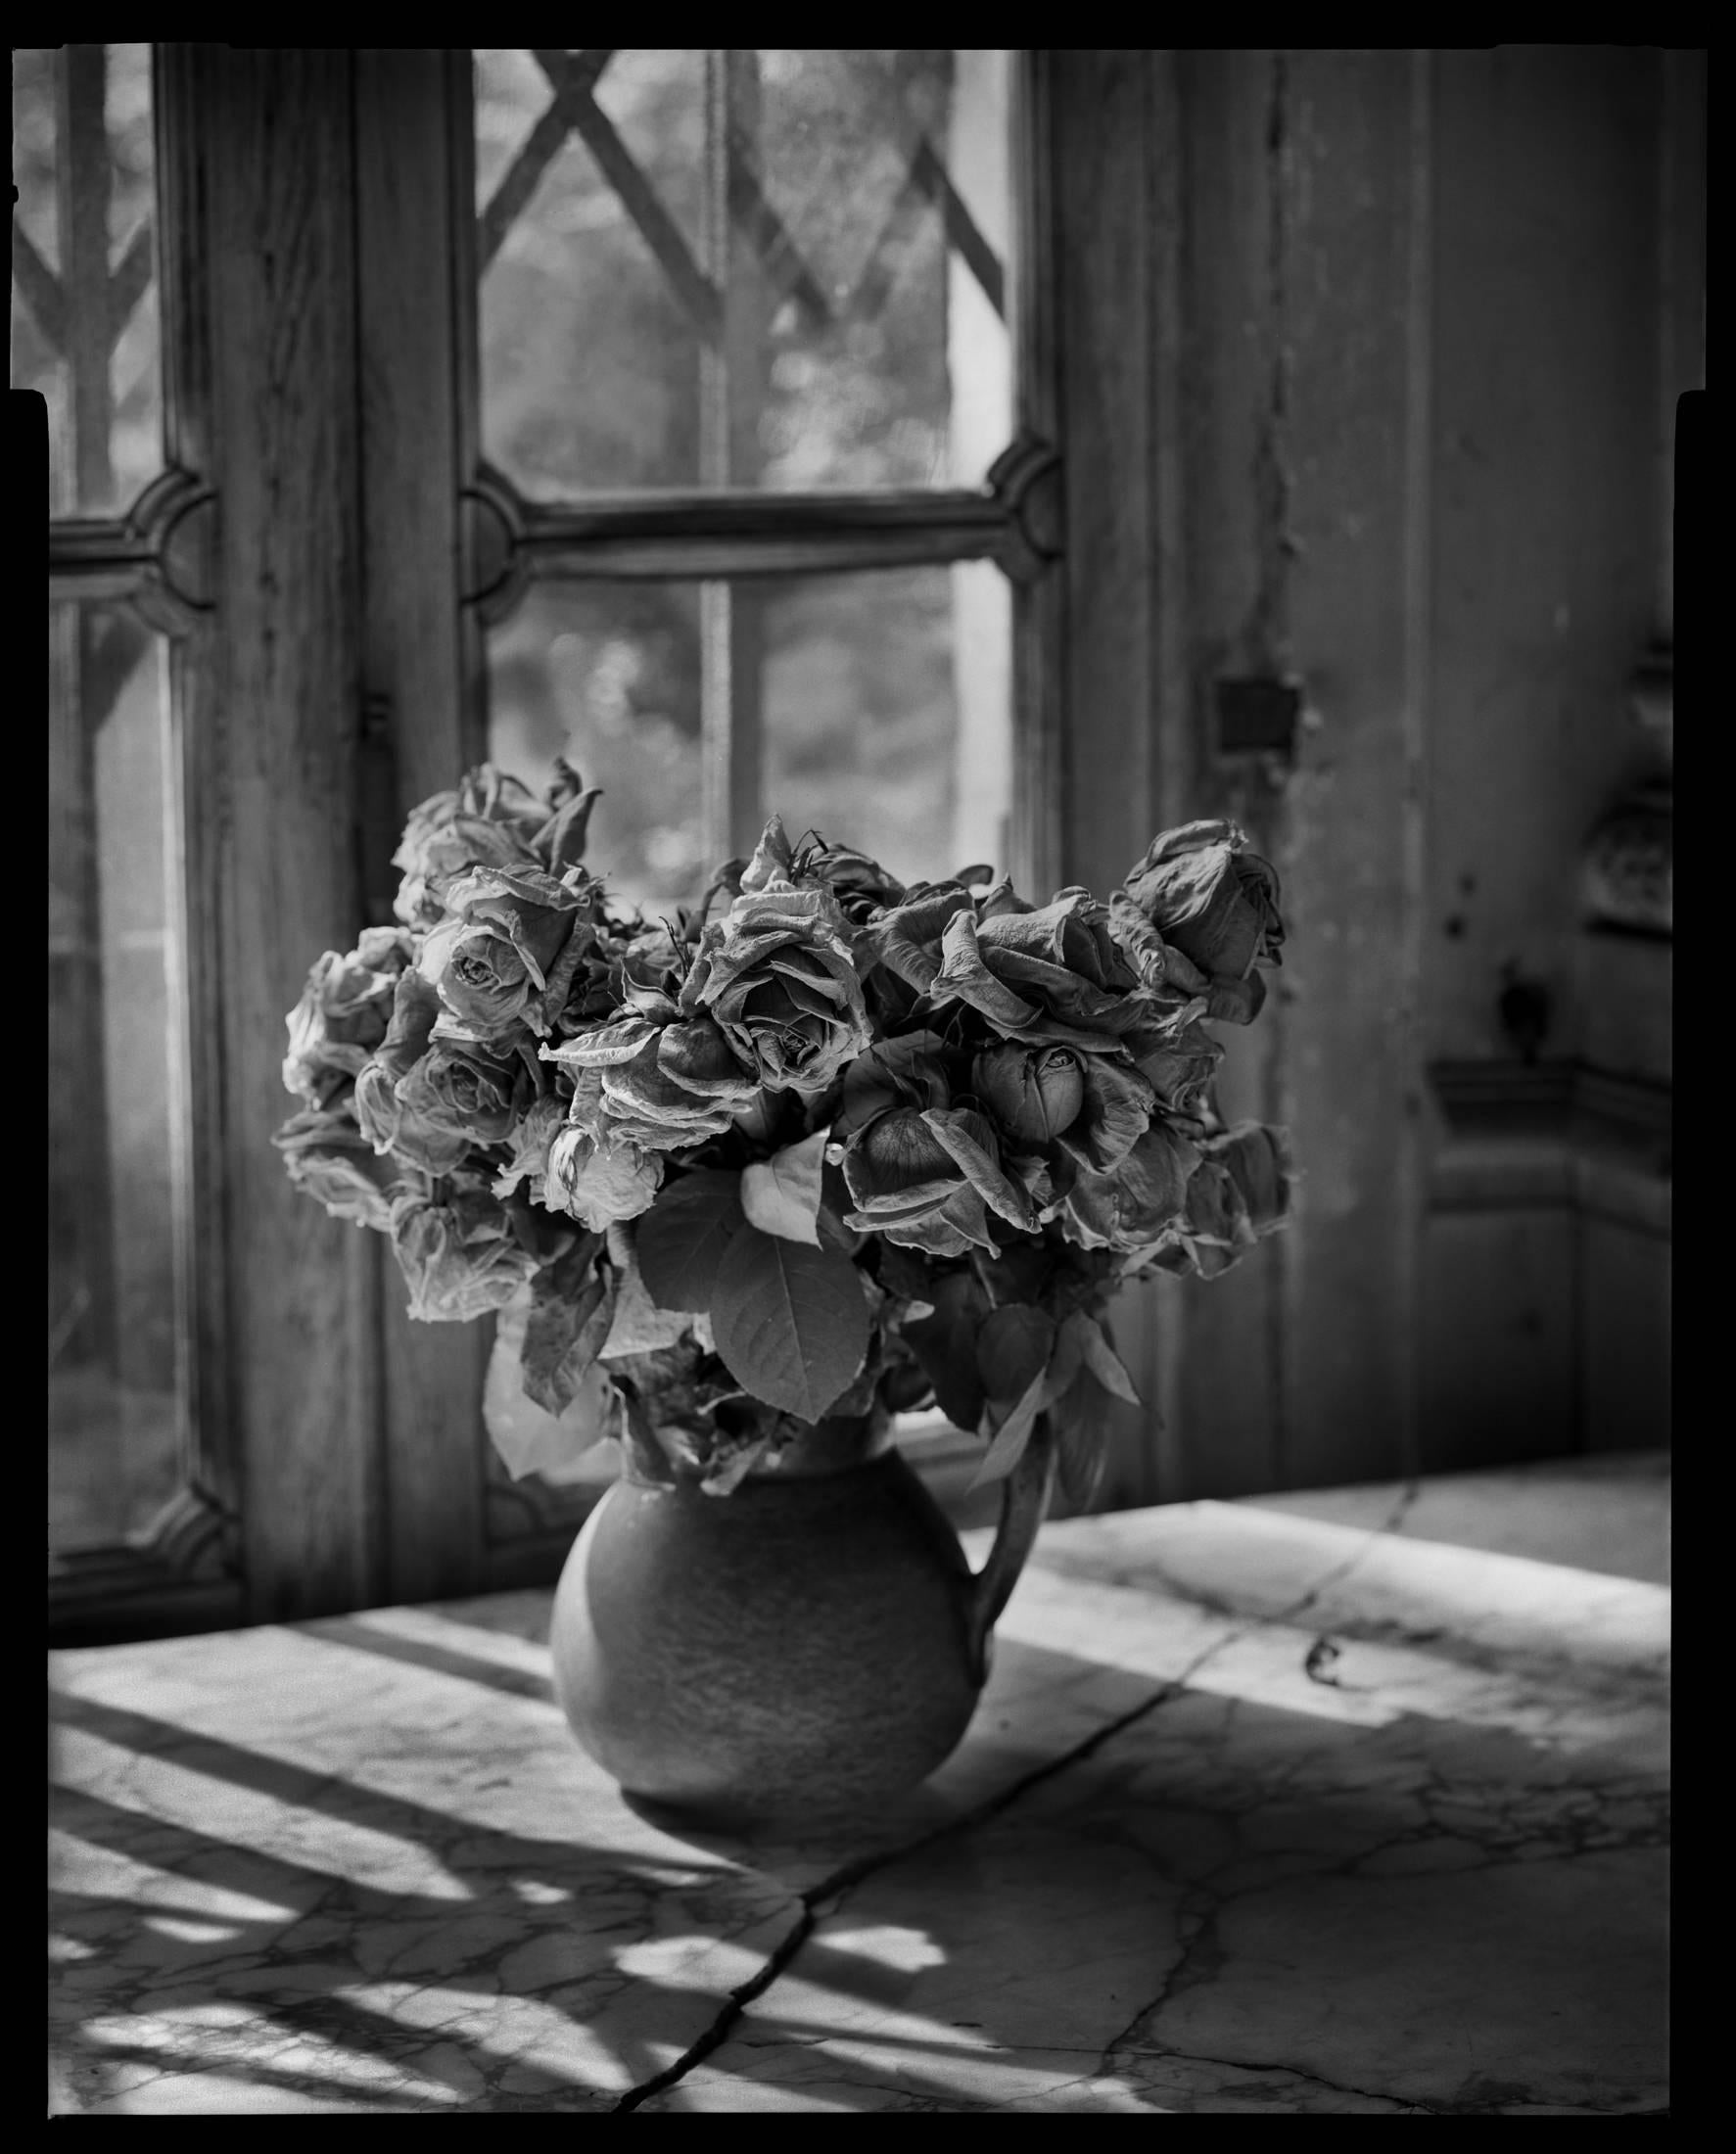 Madame Simon Residence, Paris, France "Dead Roses" - Photograph by Mark Seliger